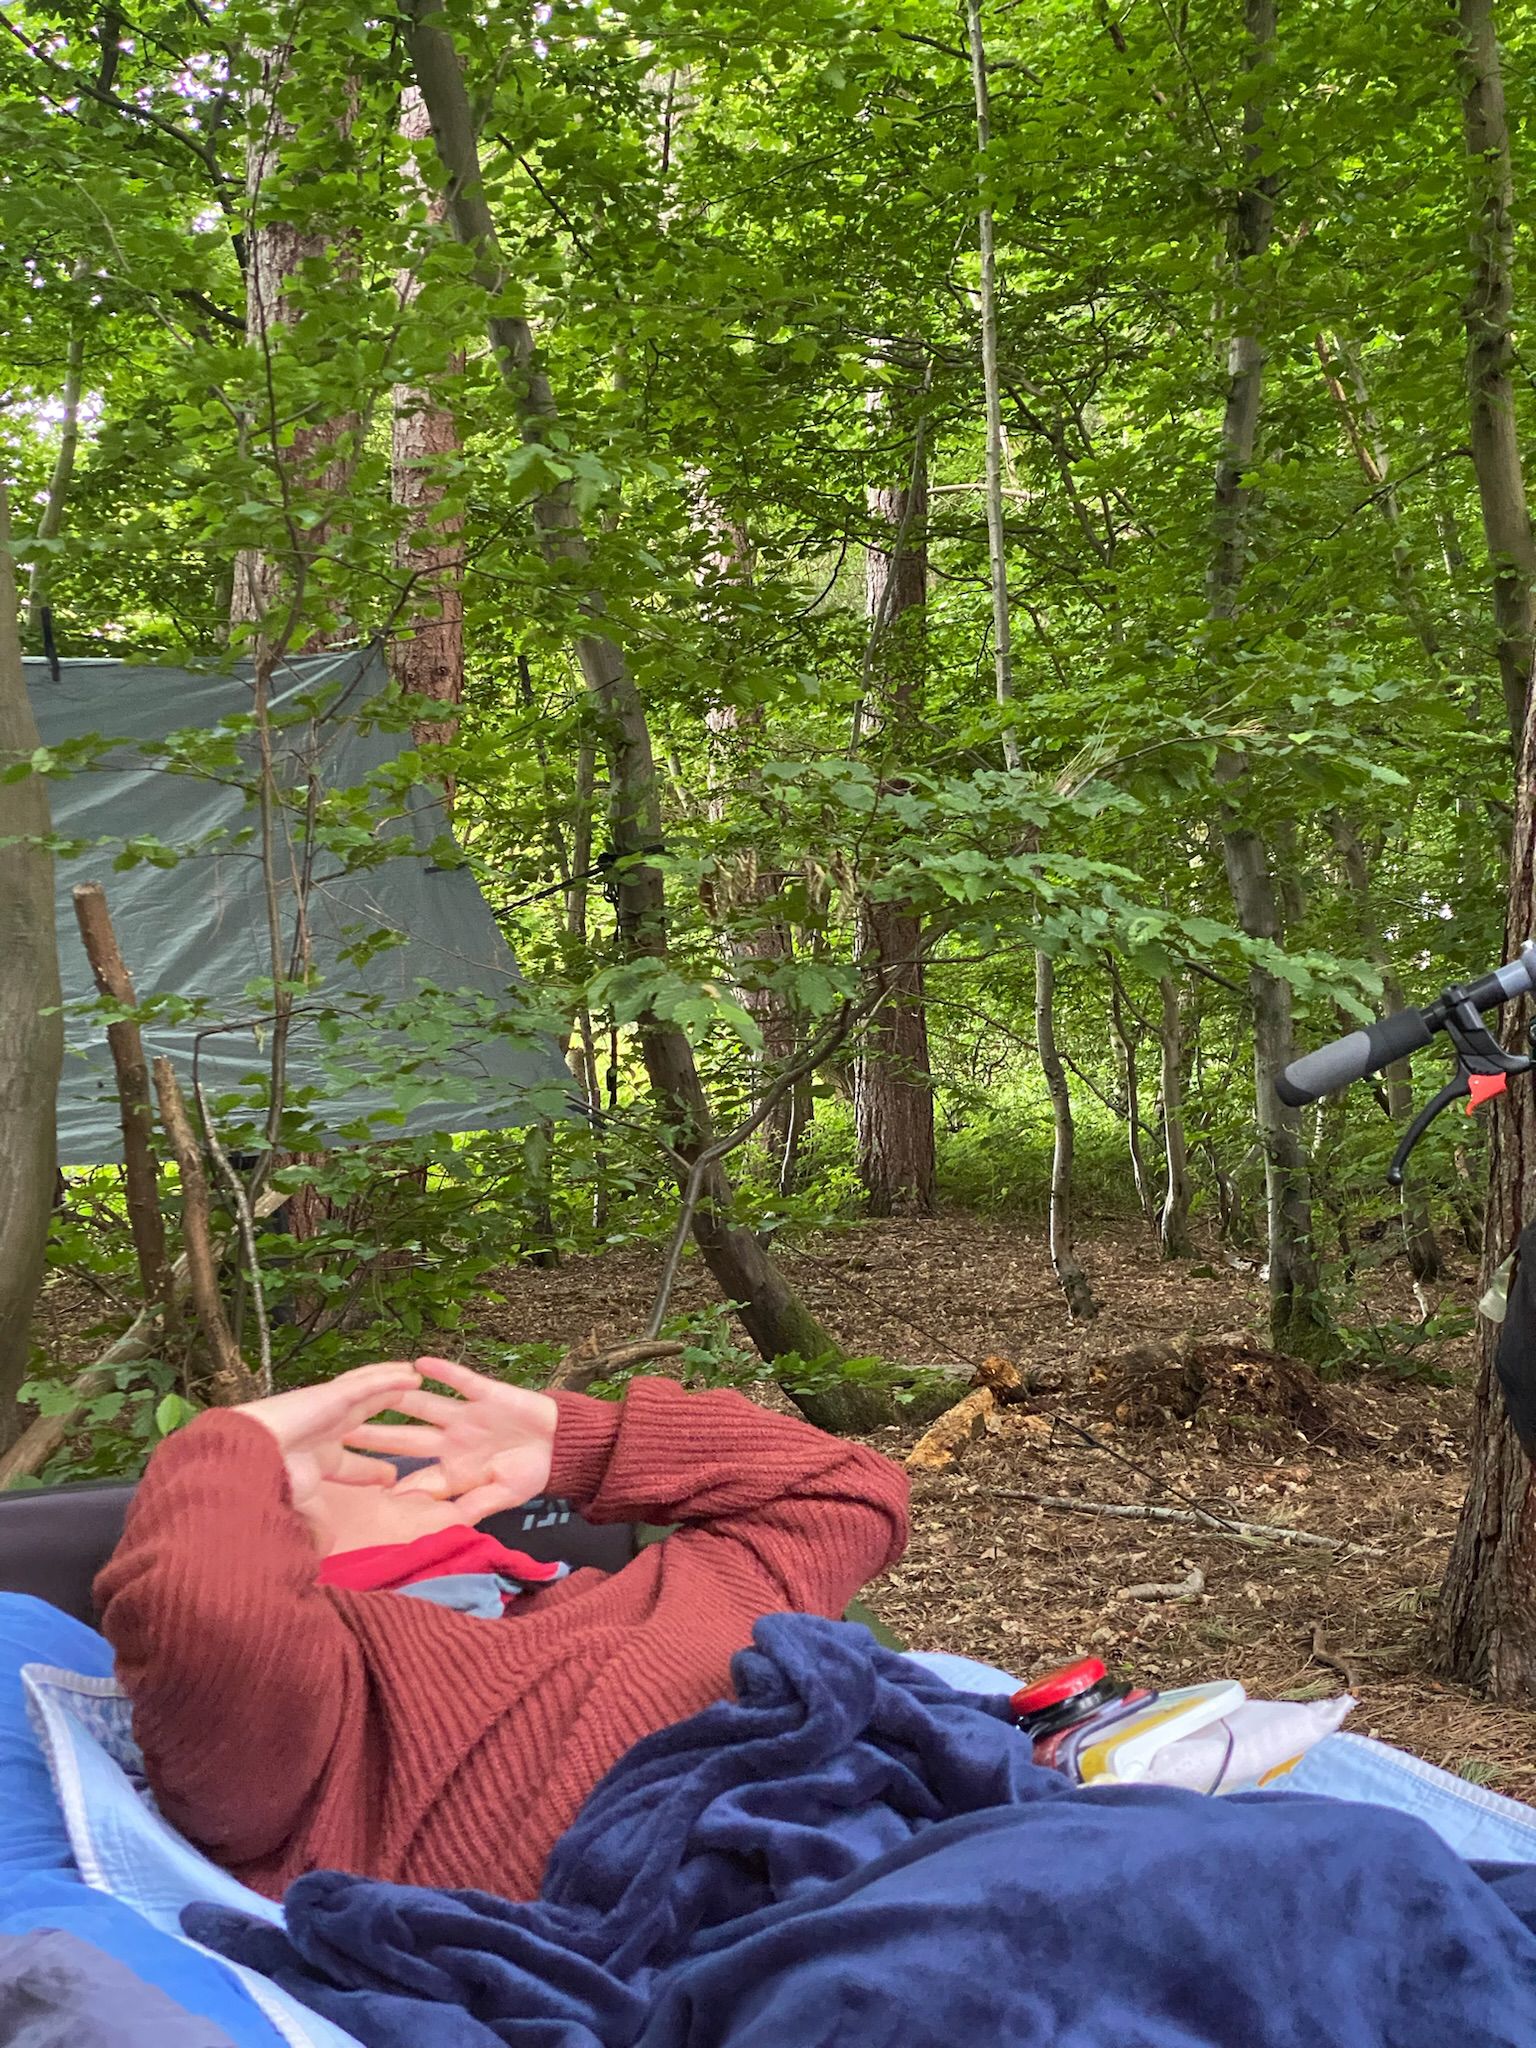 Young man with complex needs wearing a rust coloured jumper and smuggled in a blue velour blanket is lying on a camp bed outdoors in a clearing.